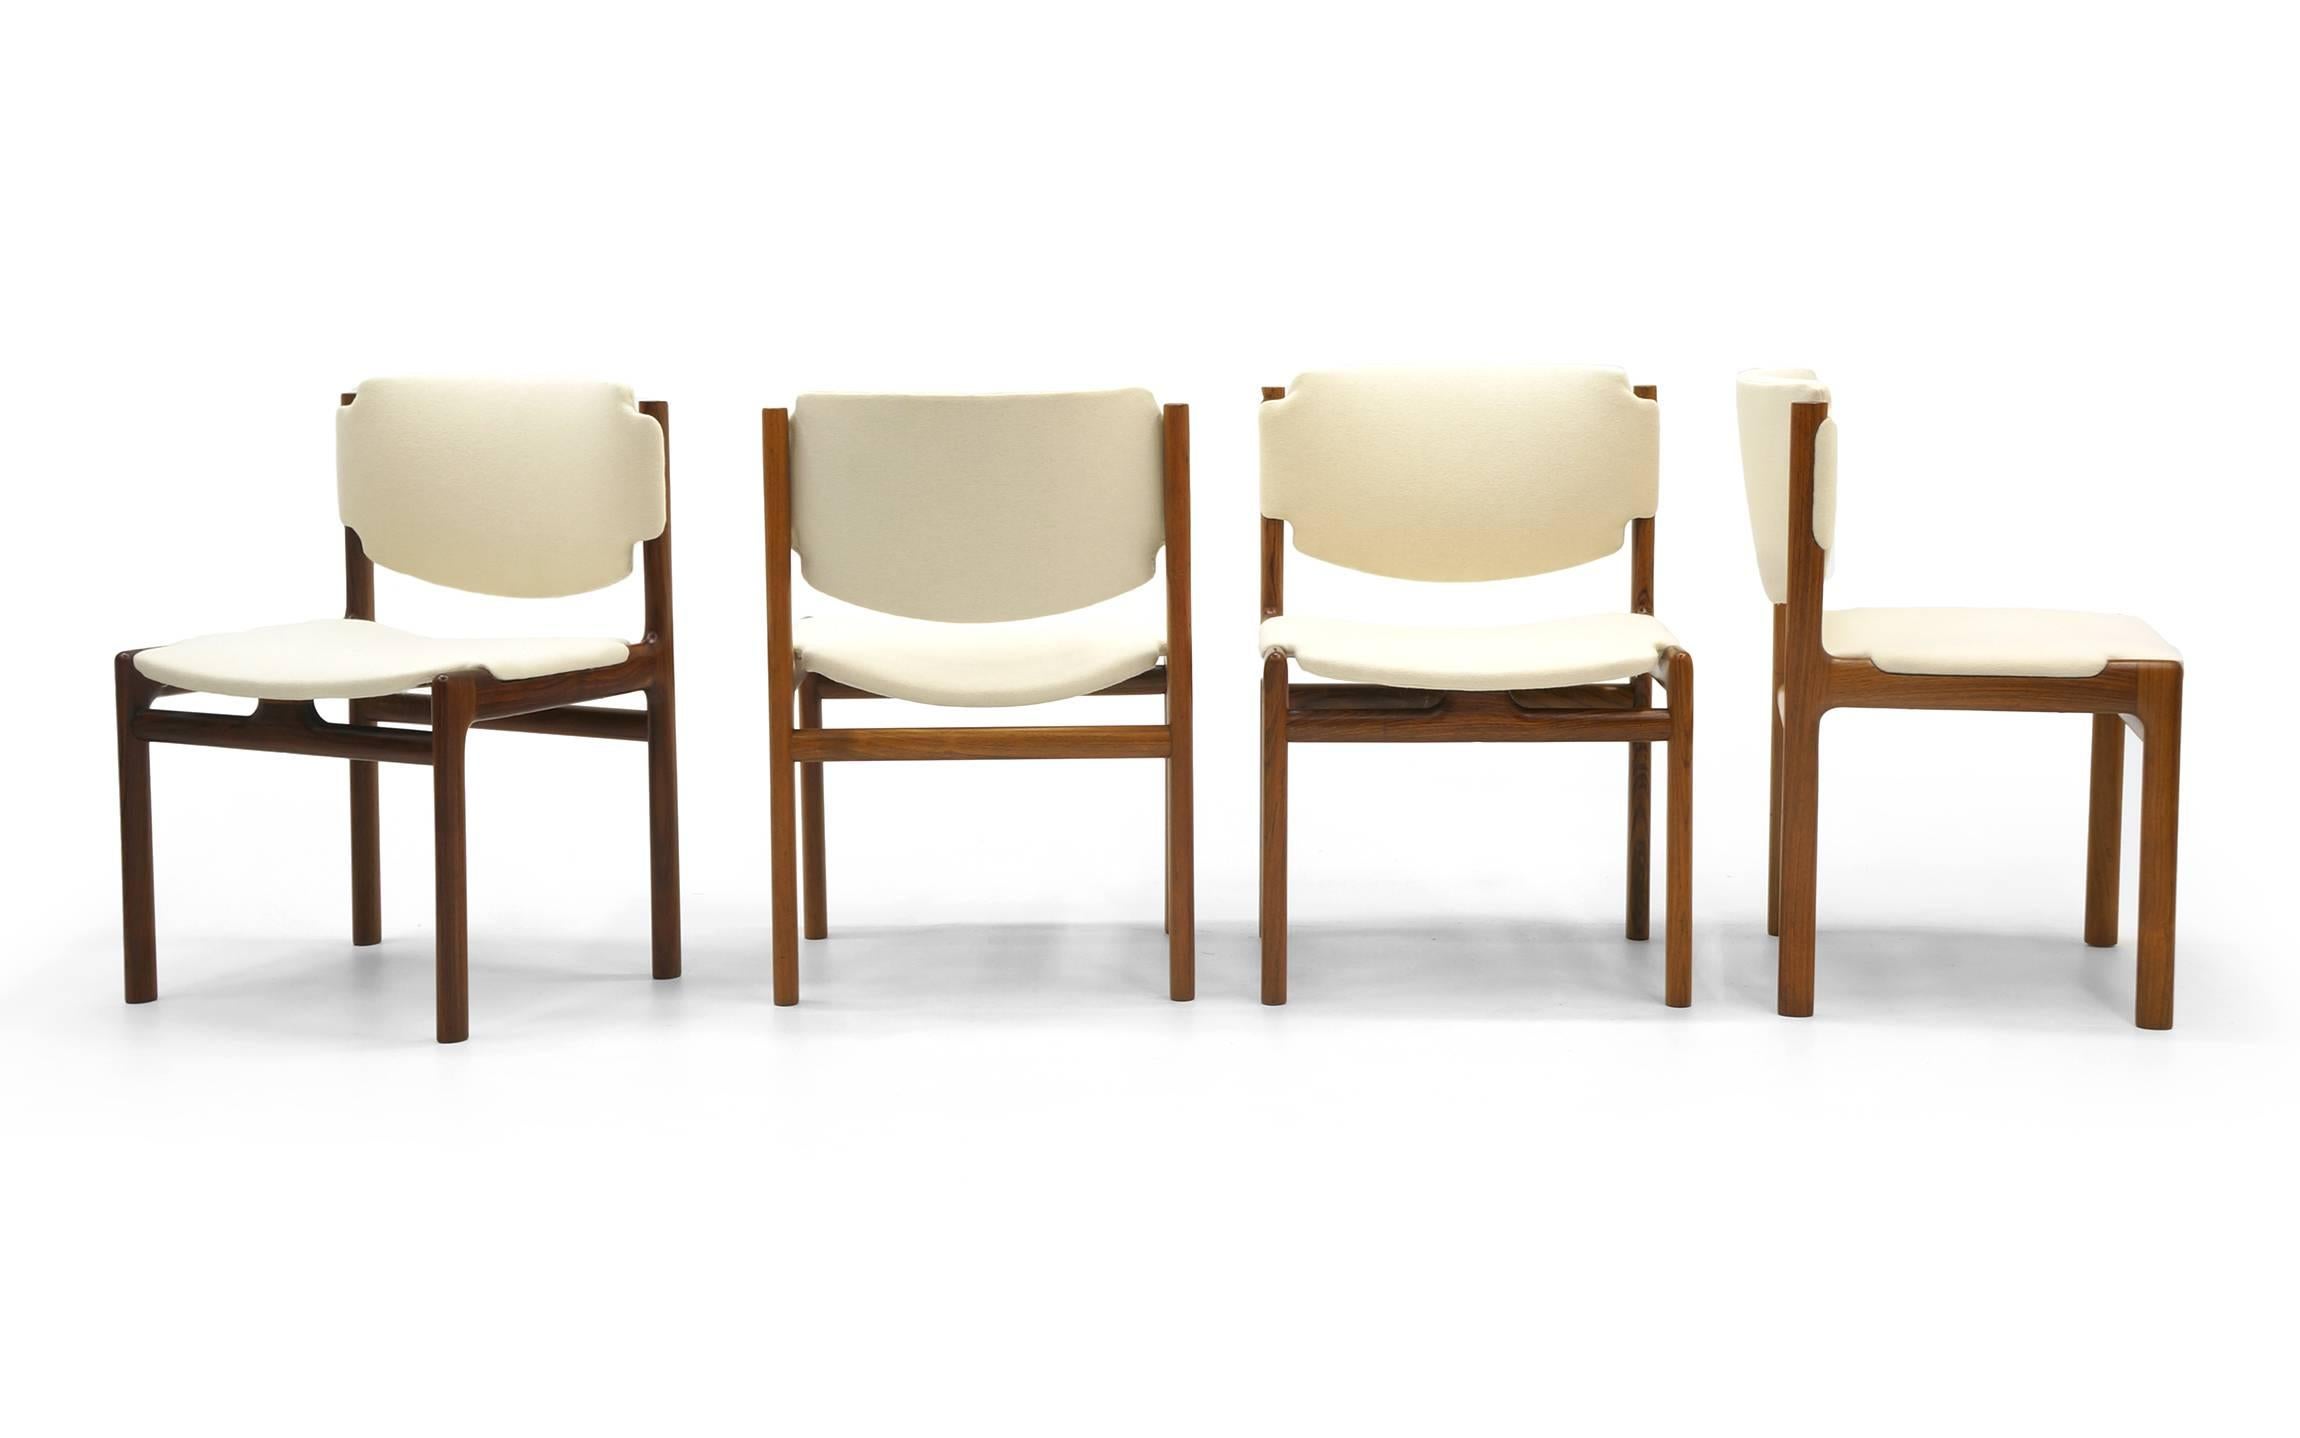 Set of eight fully restored rosewood armless dining chairs by Soren Willadsen, Denmark, 1950s. Very sturdy and comfortable. Beautiful rosewood frames with restored seats, backs and upholstered in a Maharam fabric.